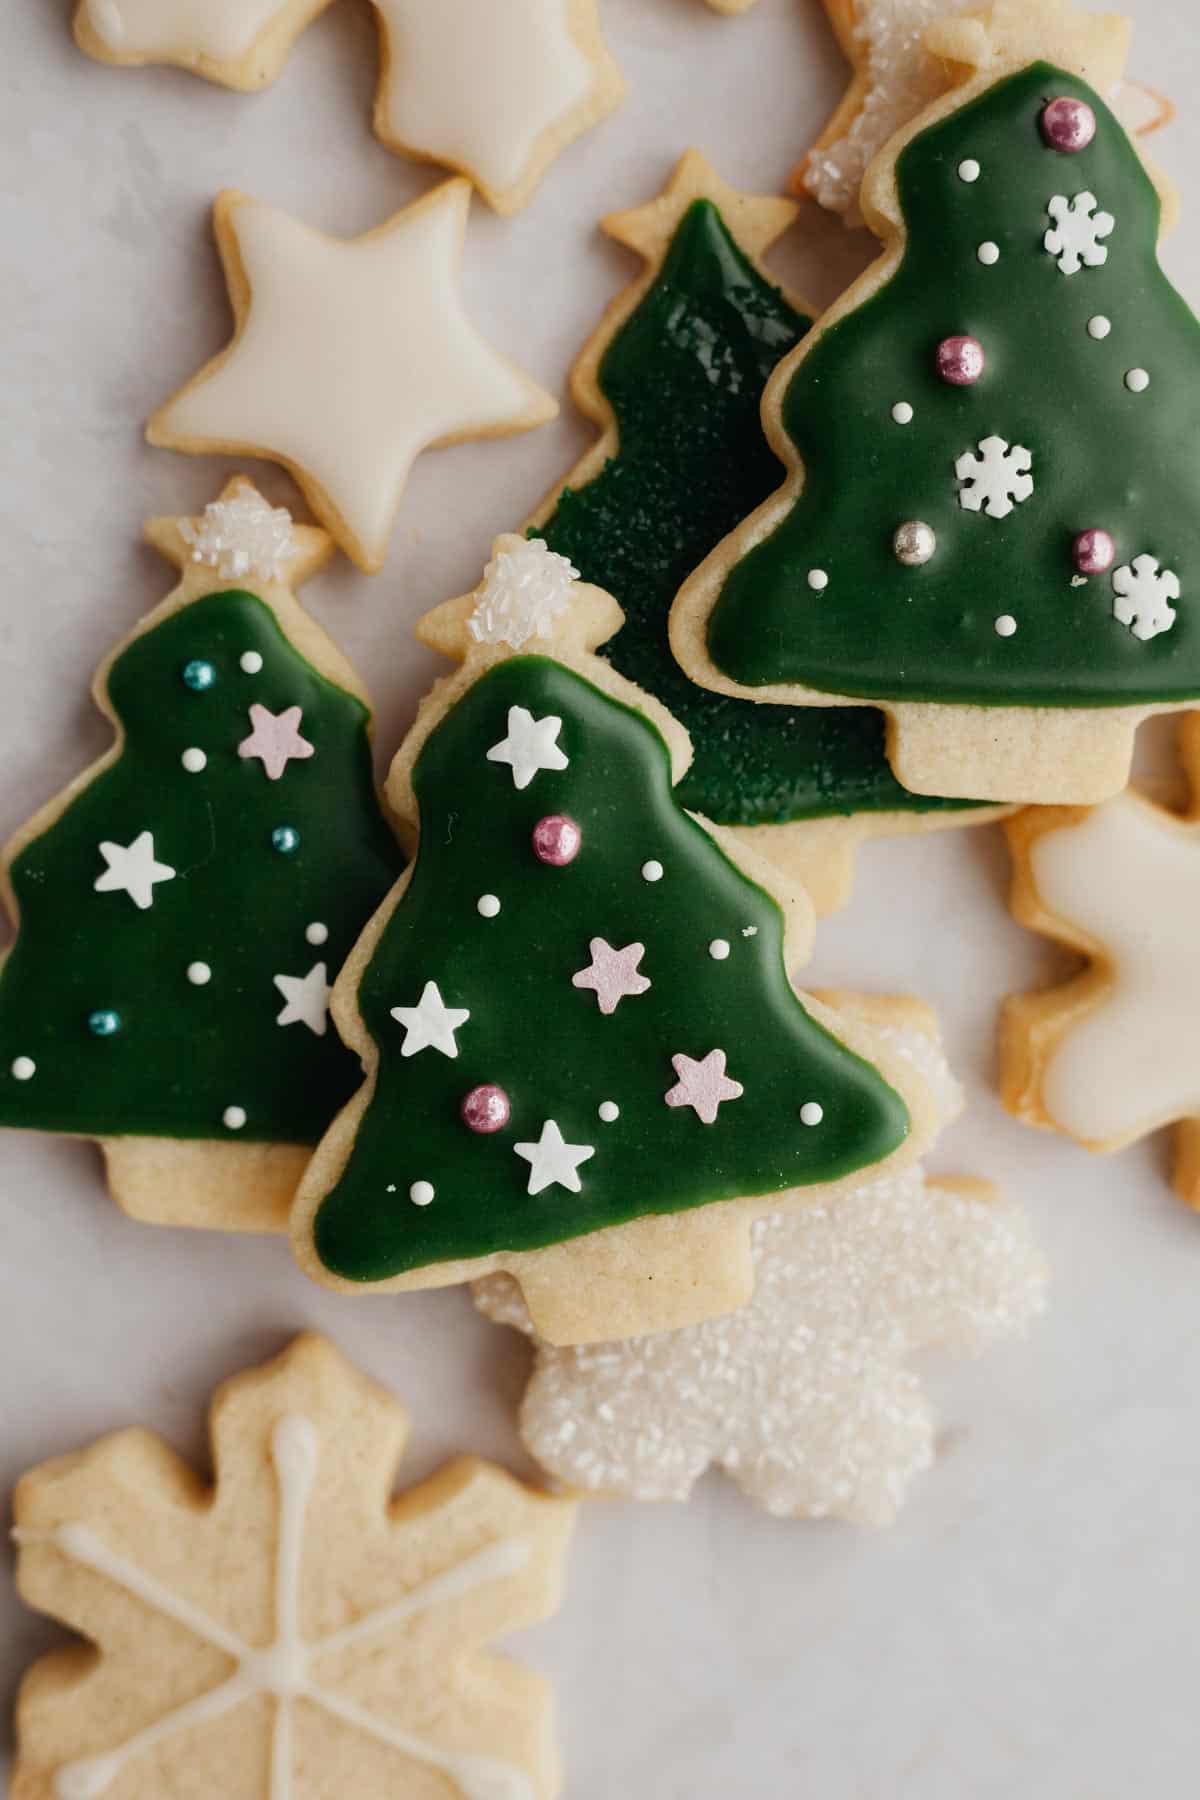 A small pile of cut out sugar cookies in the shape of Christmas trees.